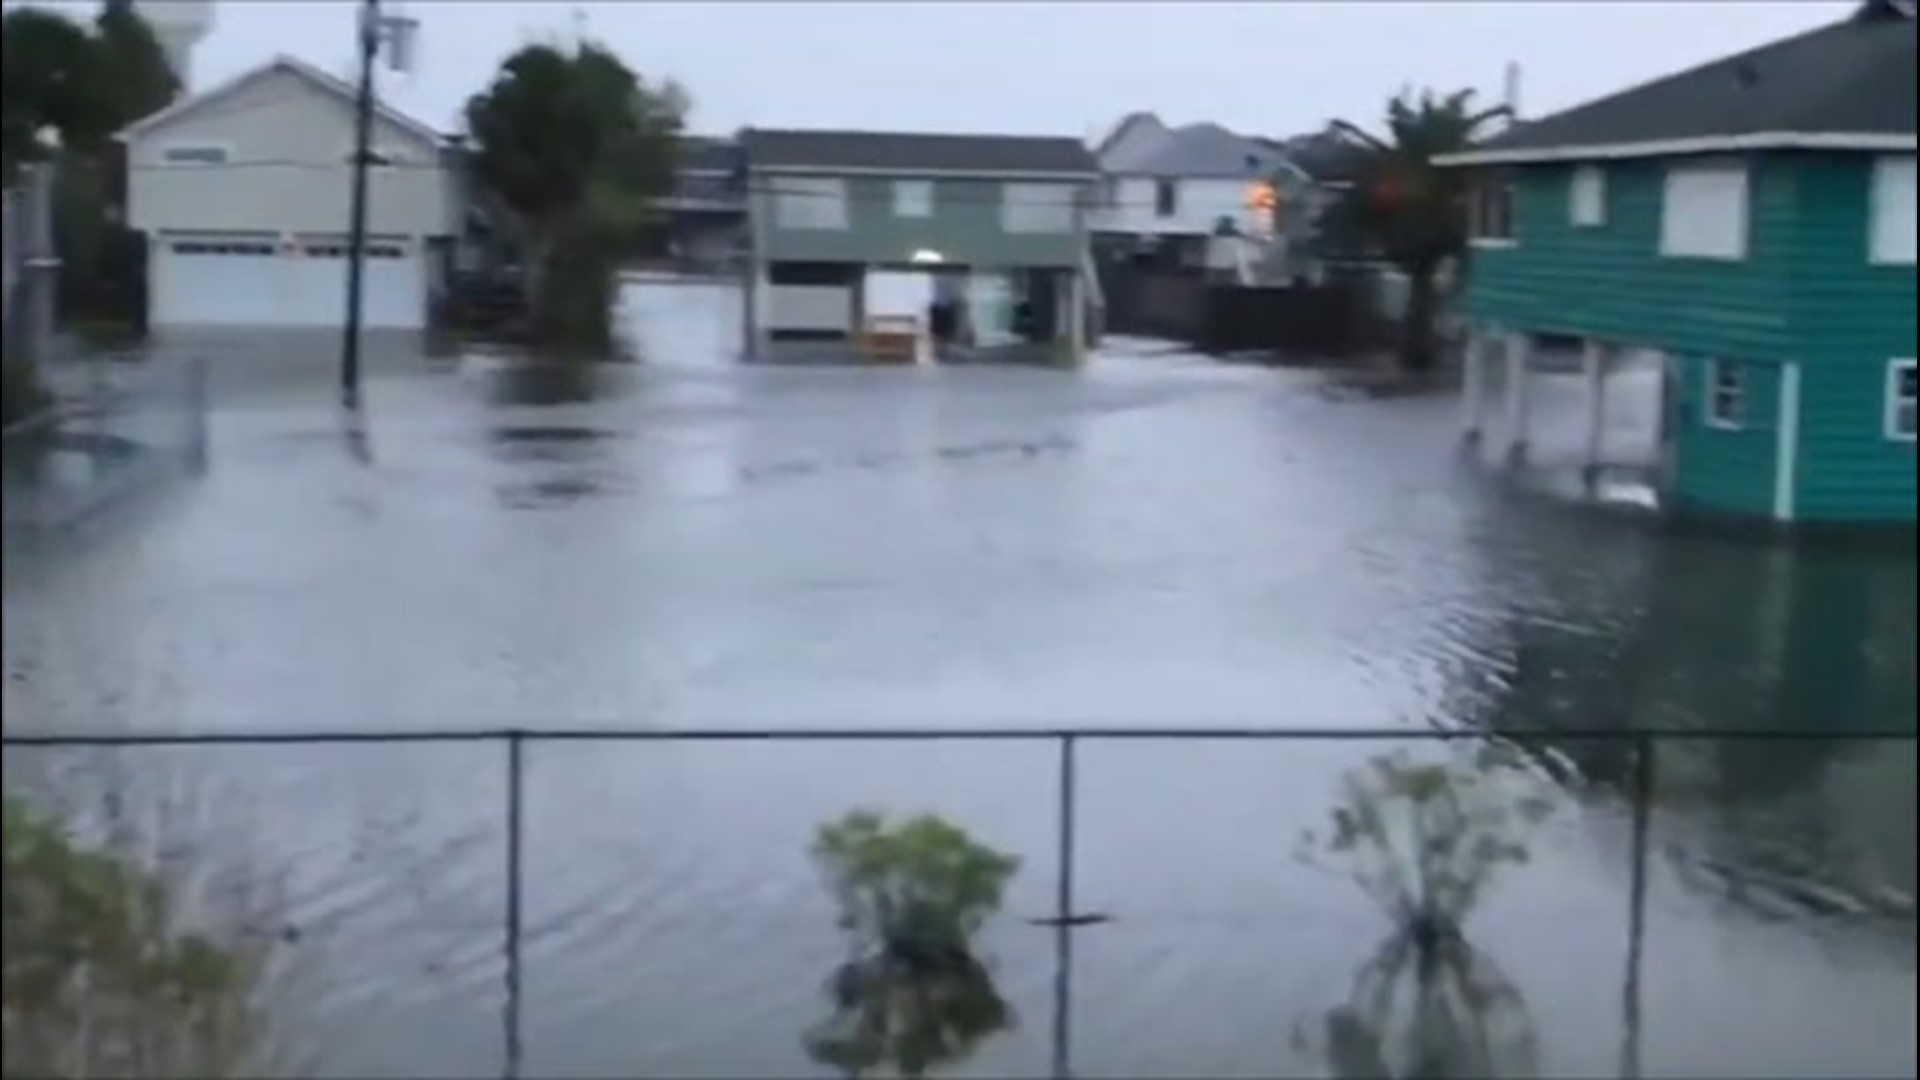 Neighborhoods in Jamaica Beach, Texas, were flooded on Sept. 20 during high tide, as Tropical Storm Beta churned in the Gulf of Mexico.